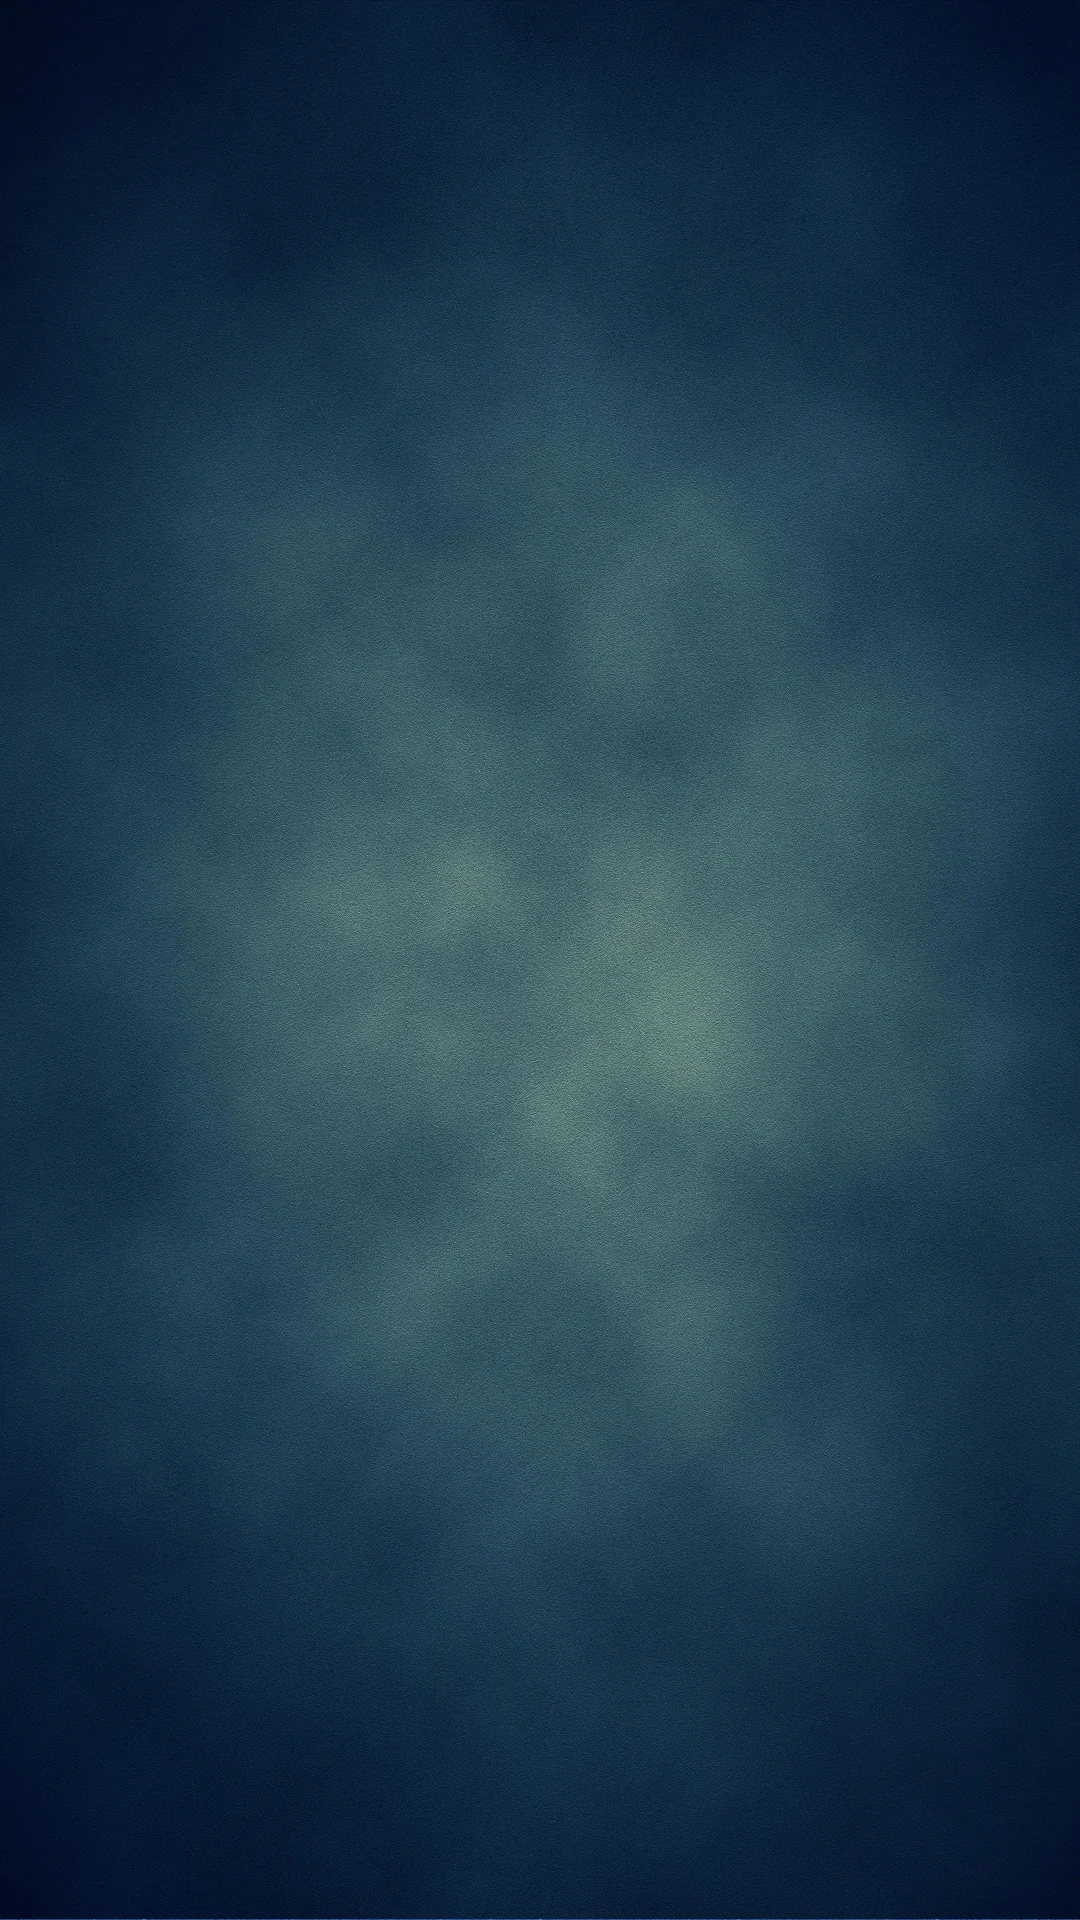 Blue htc one wallpaper Leather